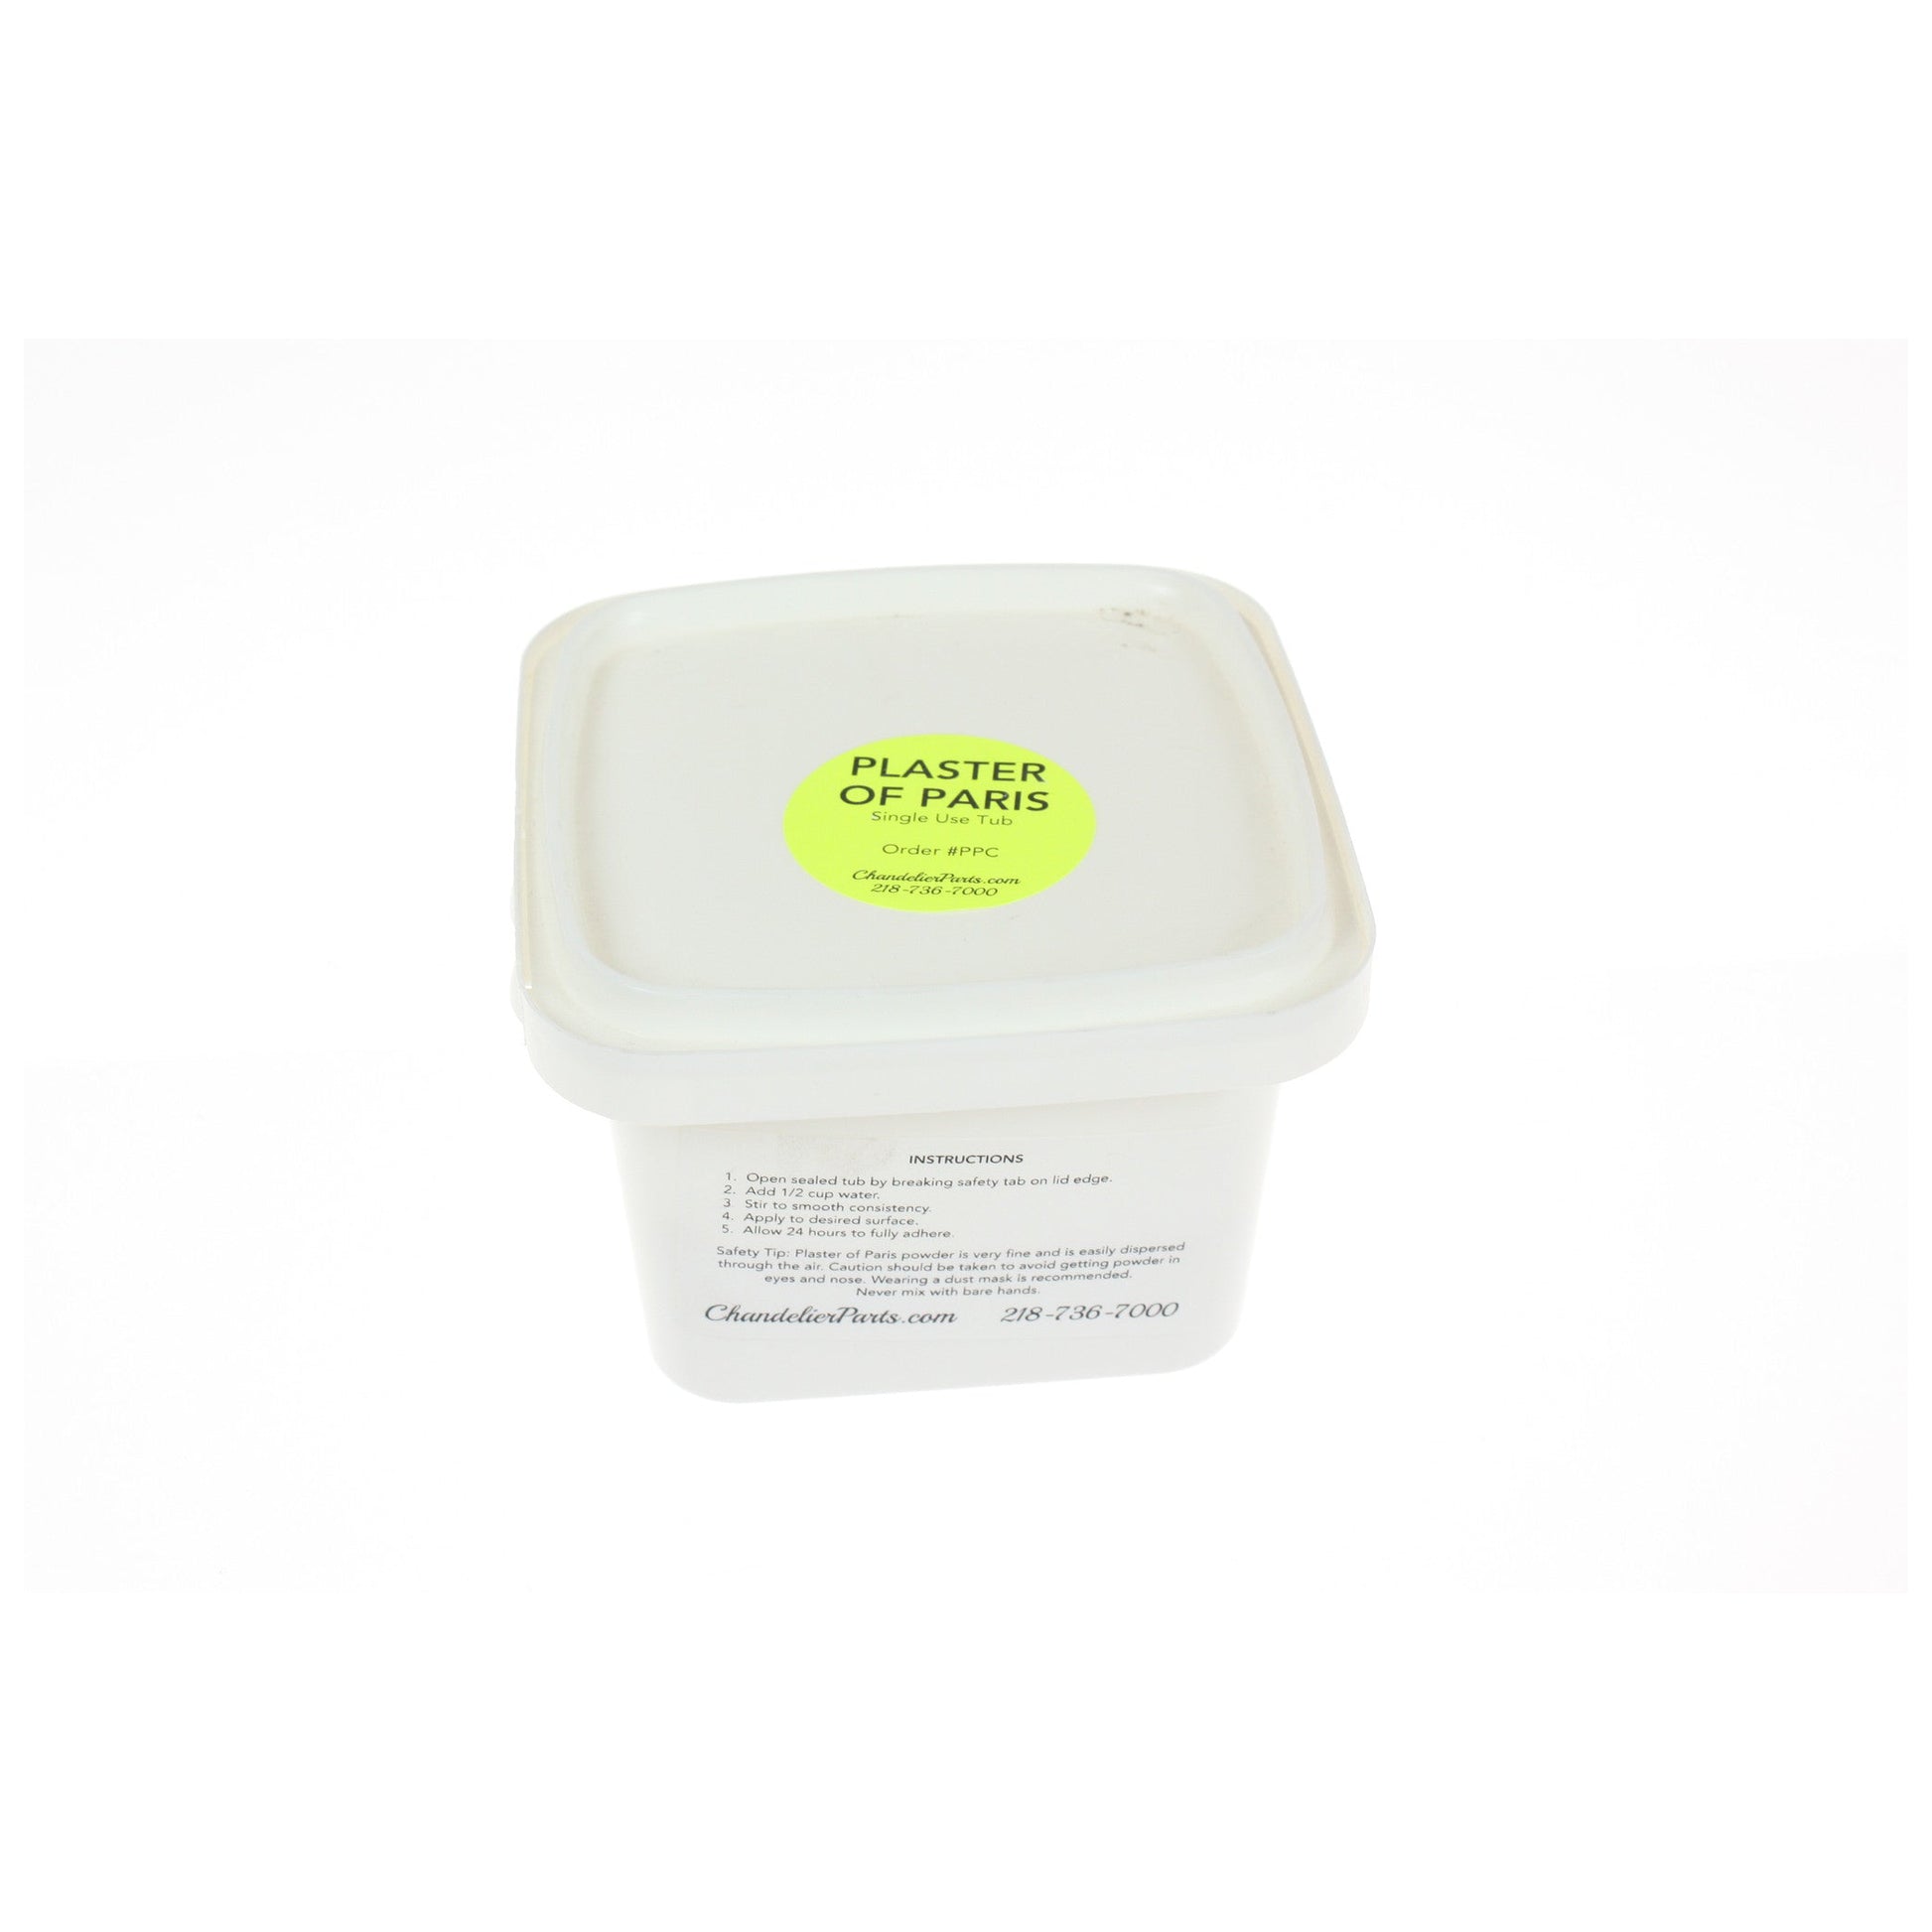  Small Plastic Container, Seamless Edges Easy to Open